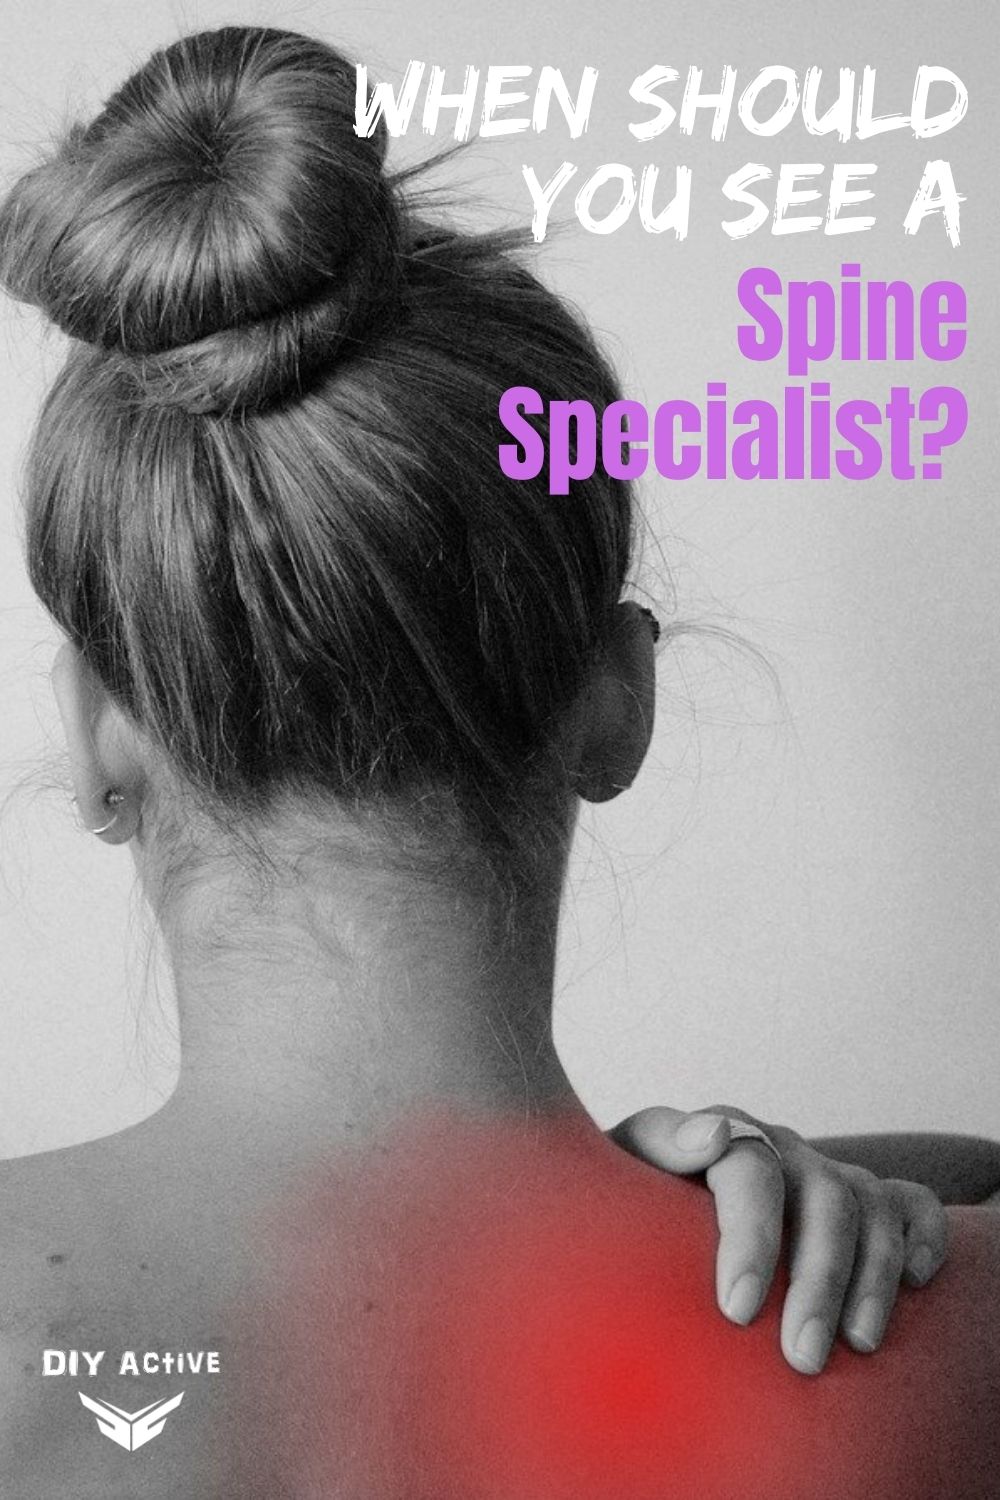 When Should You See a Spine Specialist?